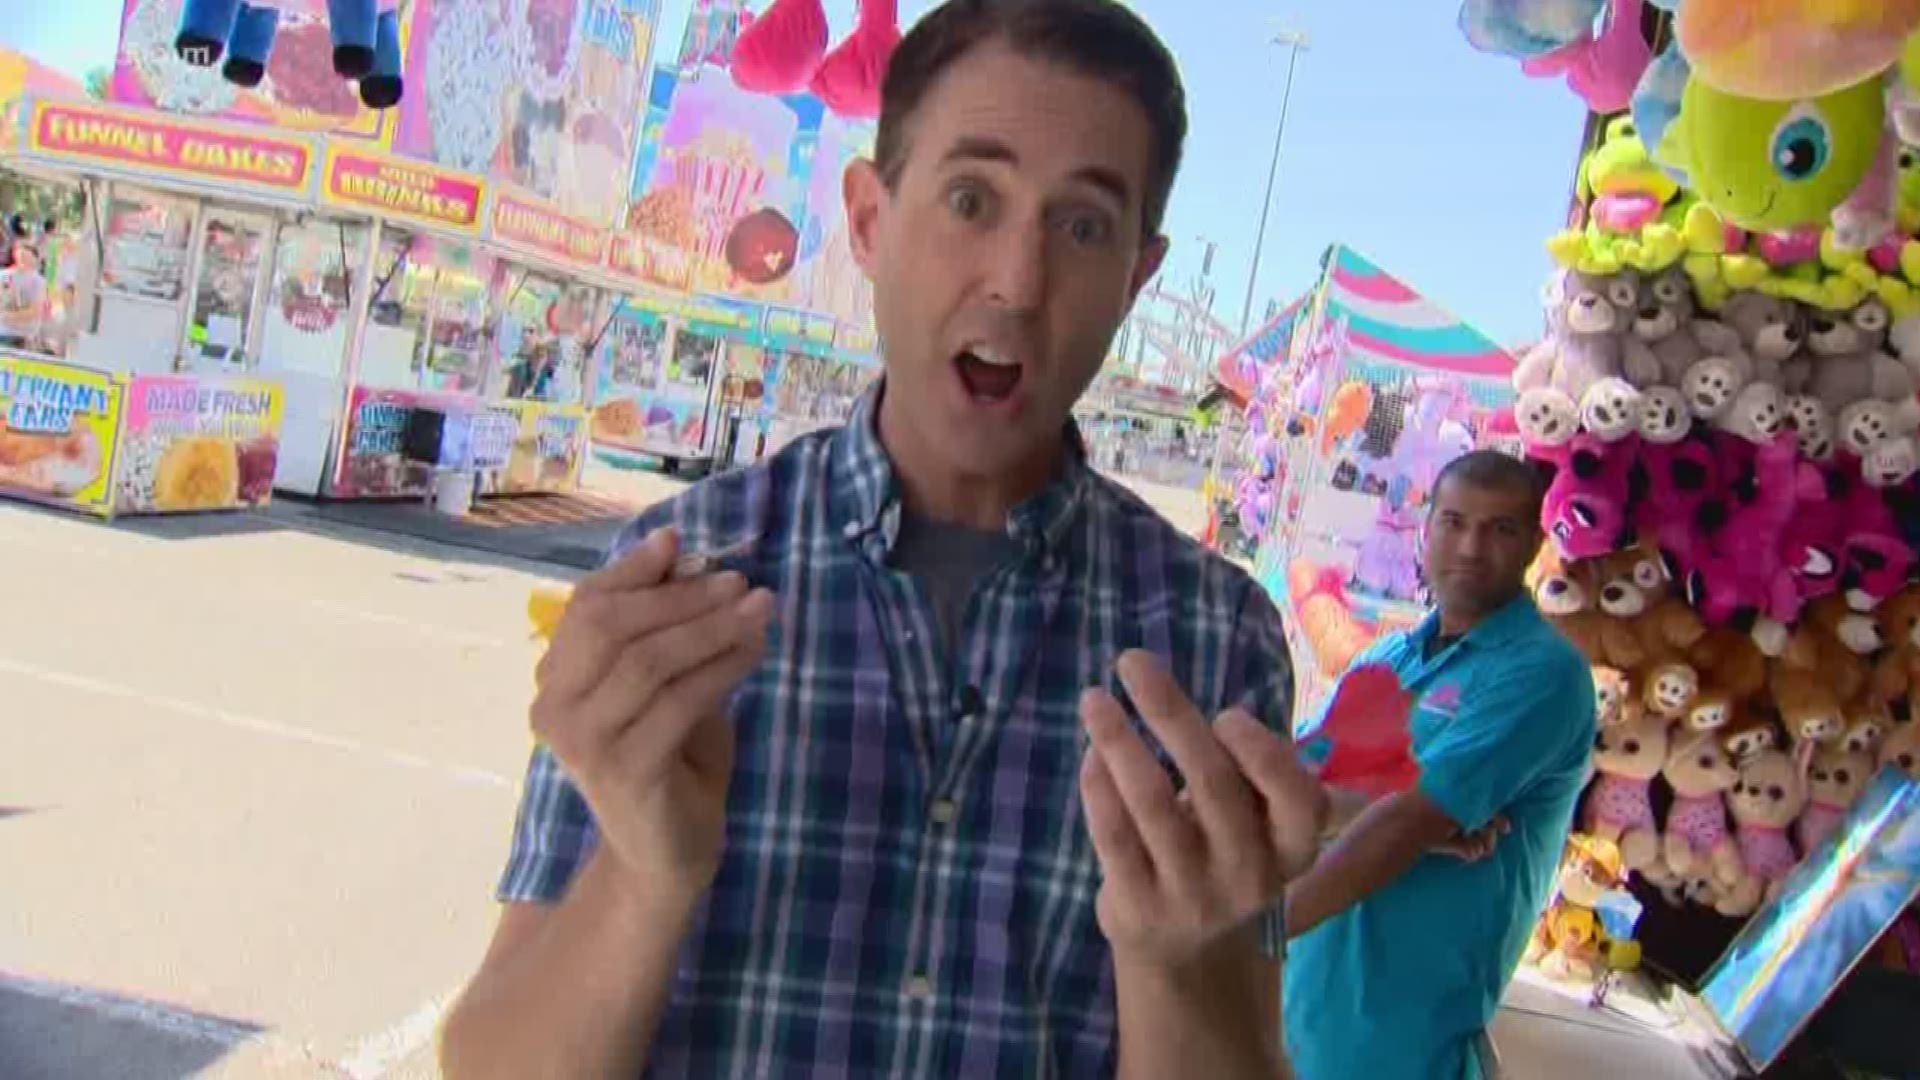 KENS 5's Jeremy Baker visited the event to find out which carnival games are easiest and which had him pulling his hair out.